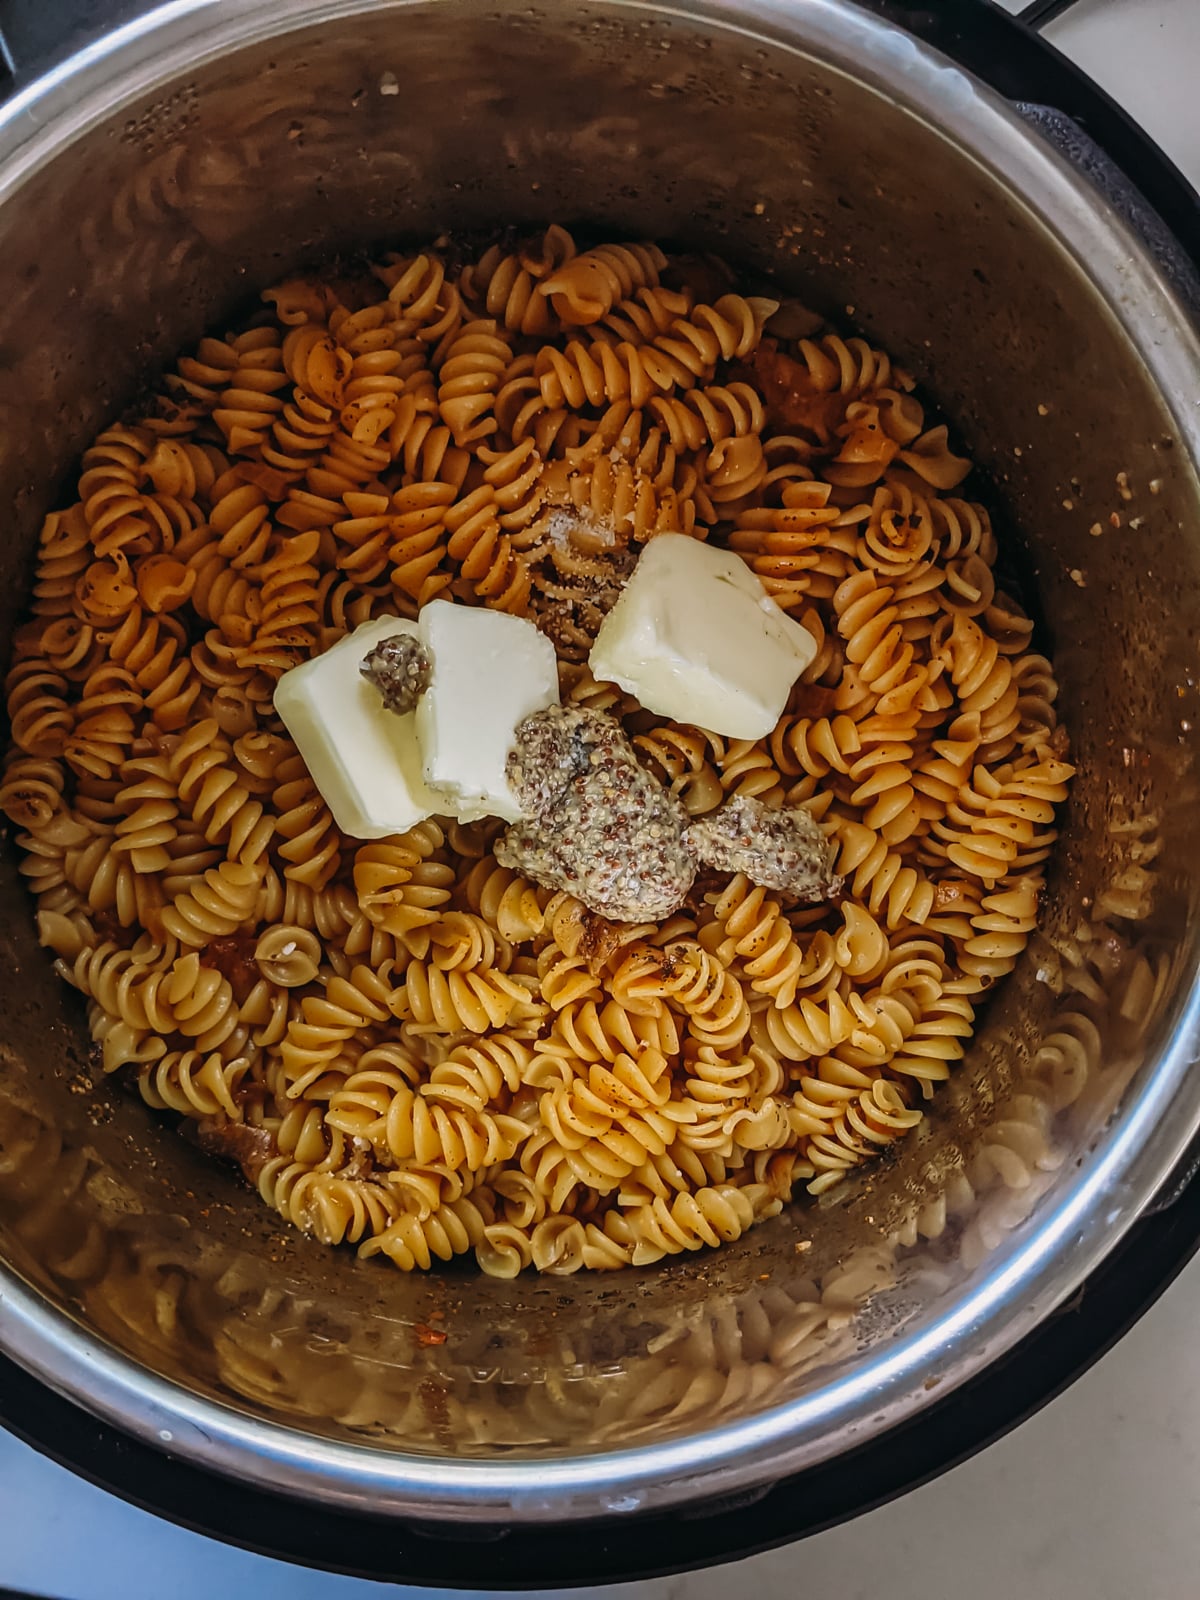 butter, dijon and spices added to cooked pasta to make instant pot mac and cheese.